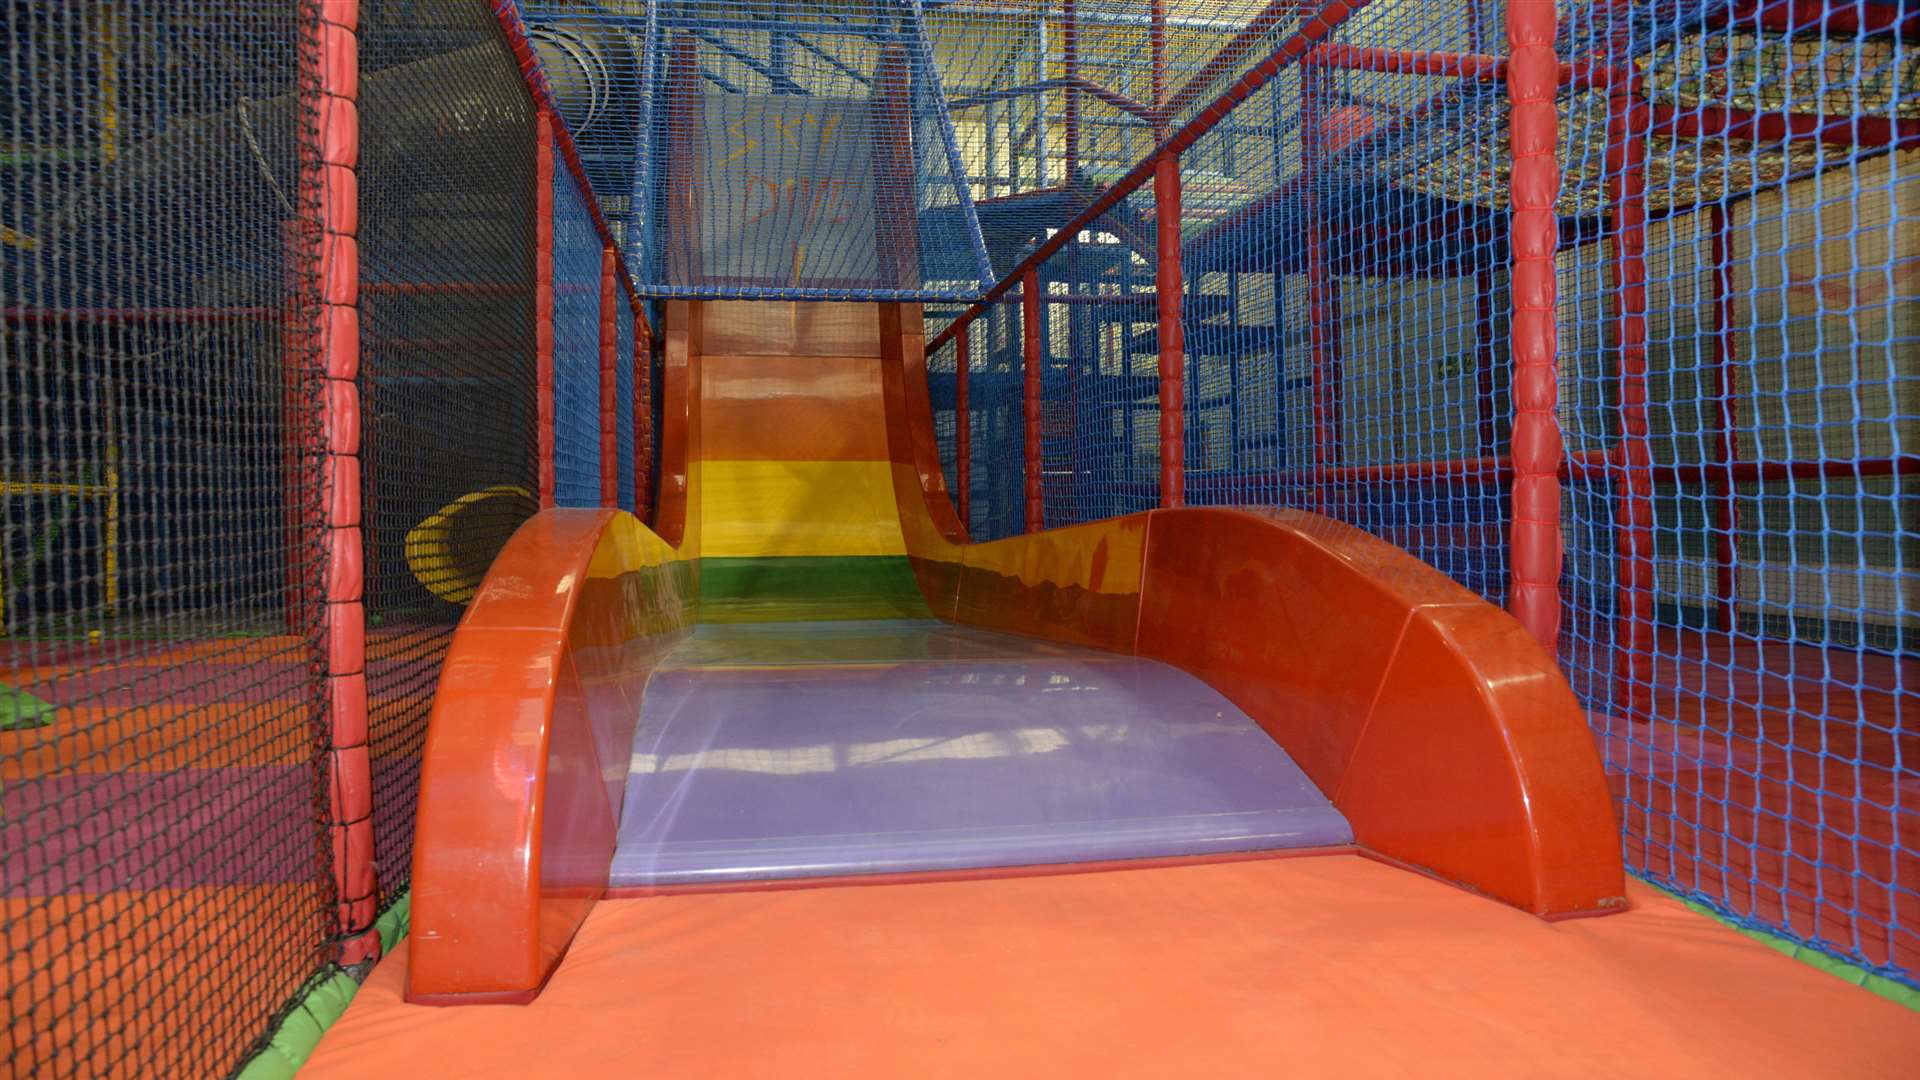 Six slides will feature in the play area